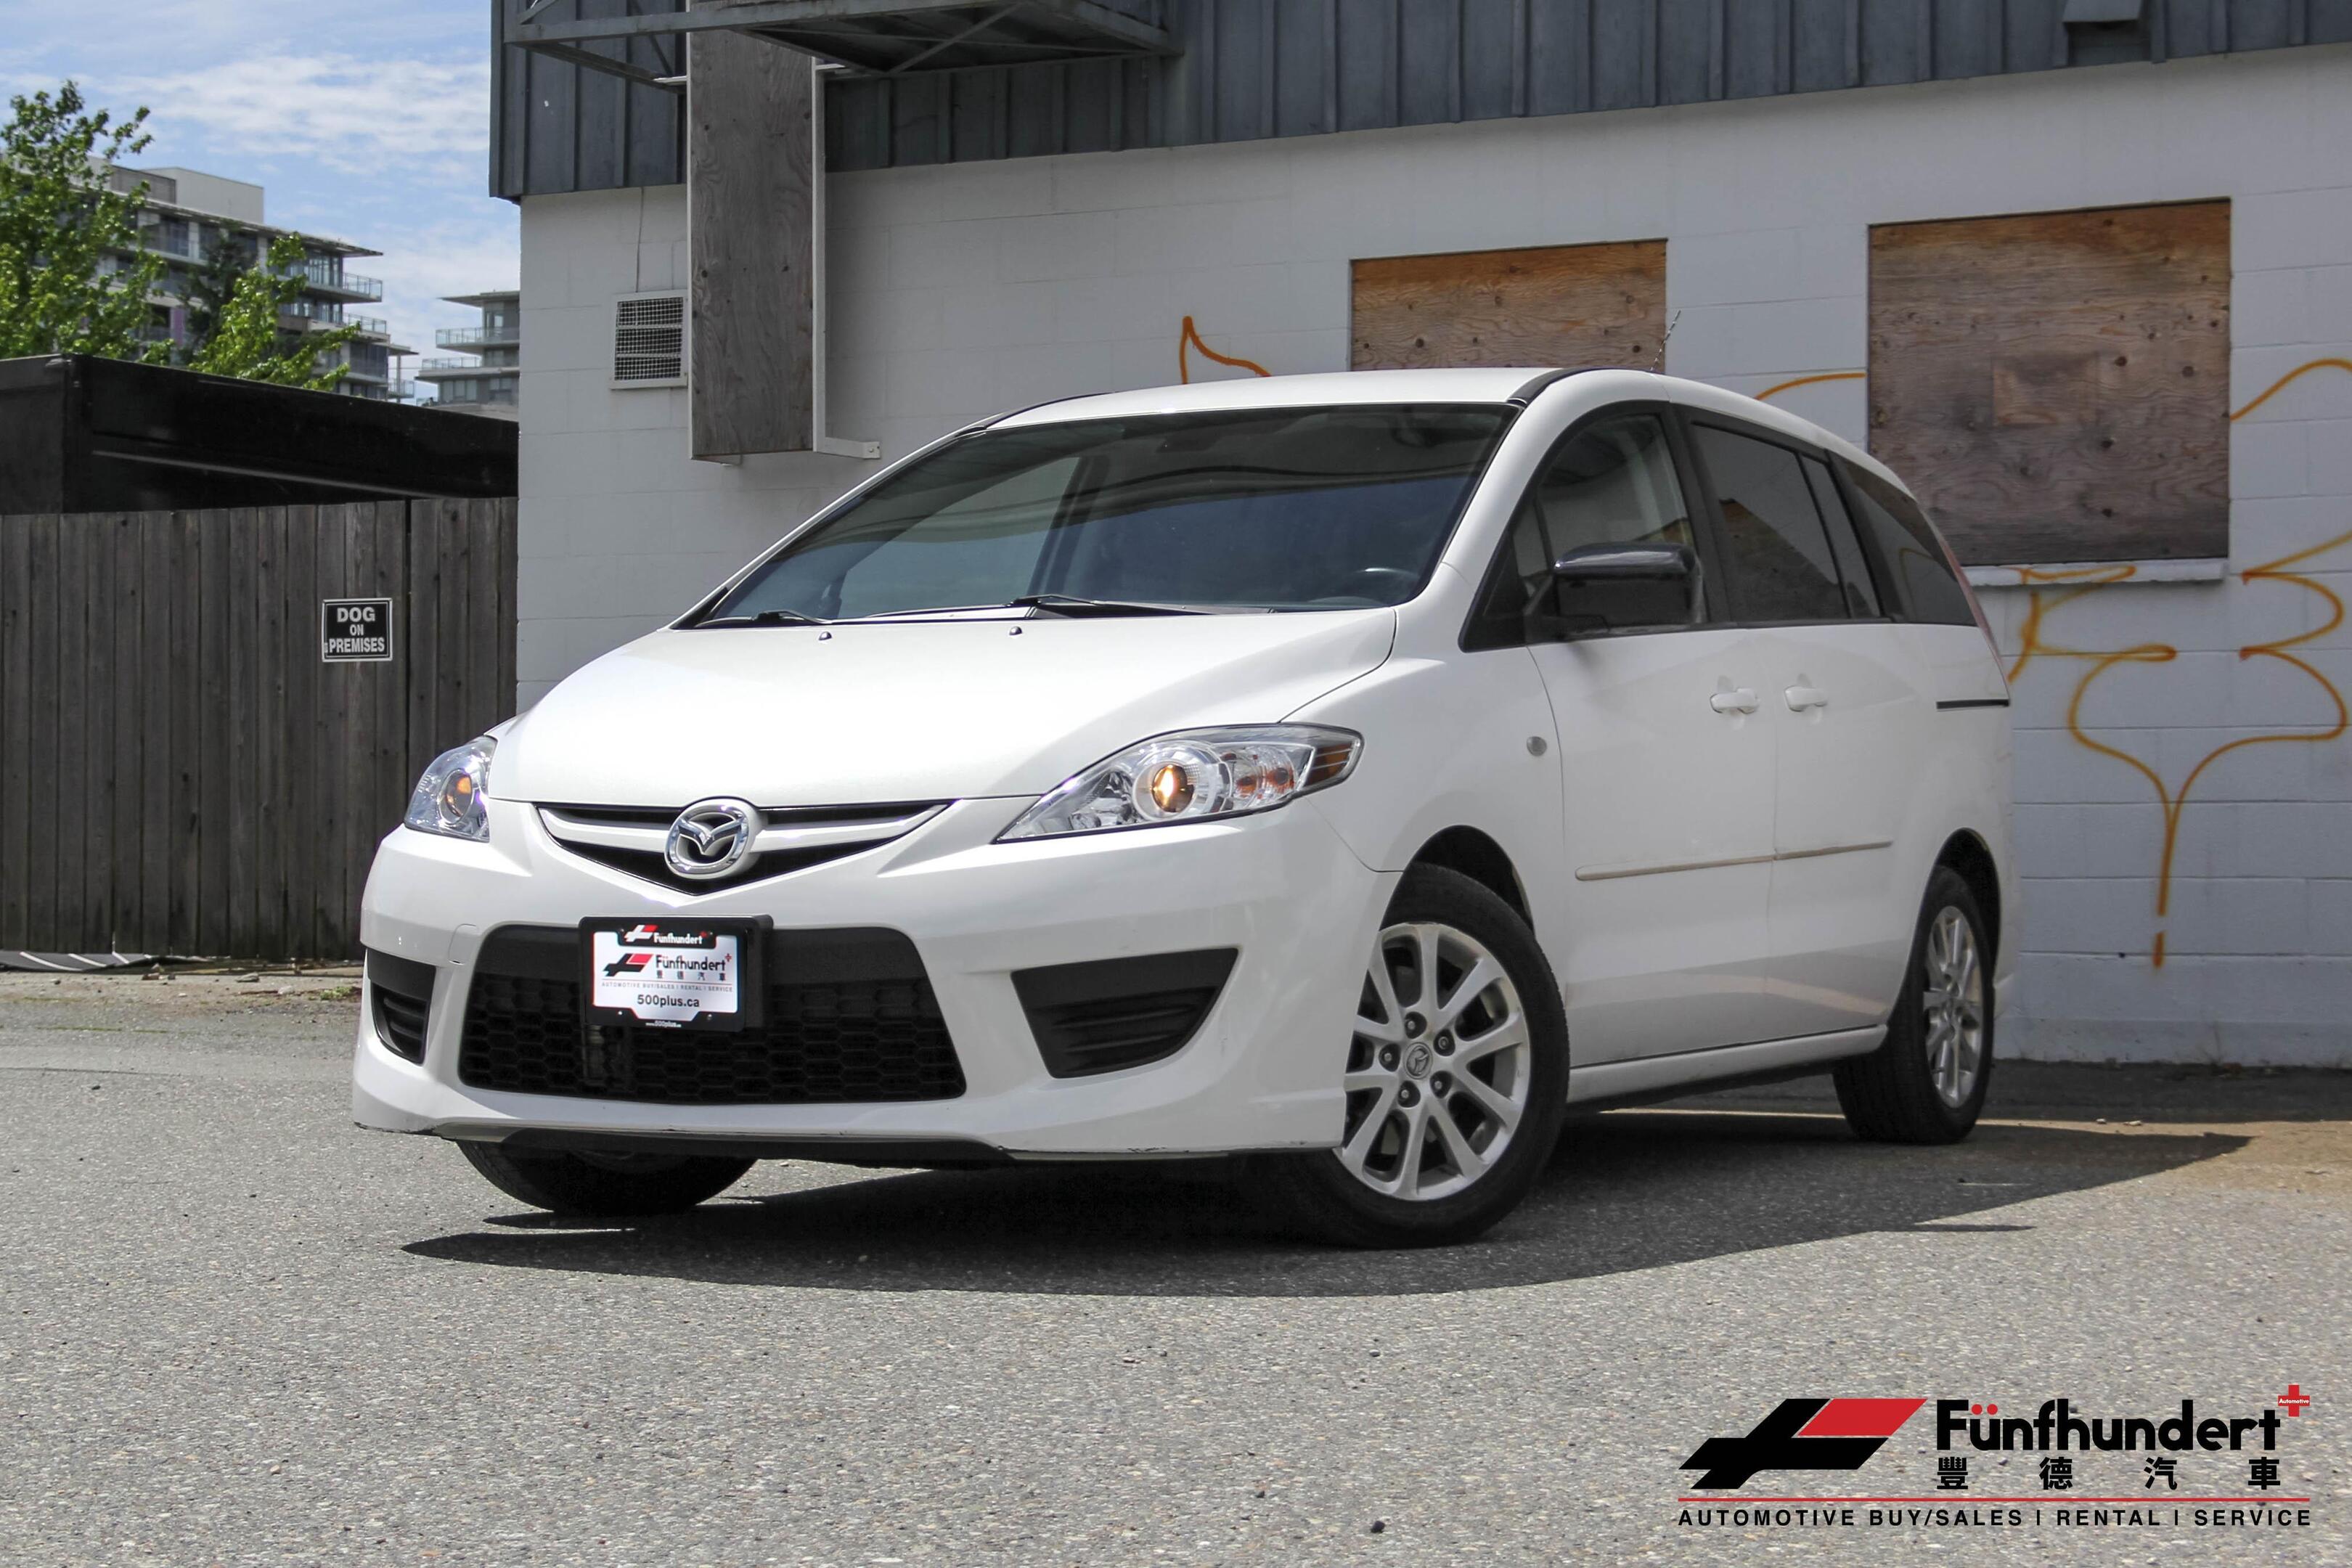 2009 Mazda Mazda5 4dr Wgn Auto GS/Local Car/Only 73,119 Kms